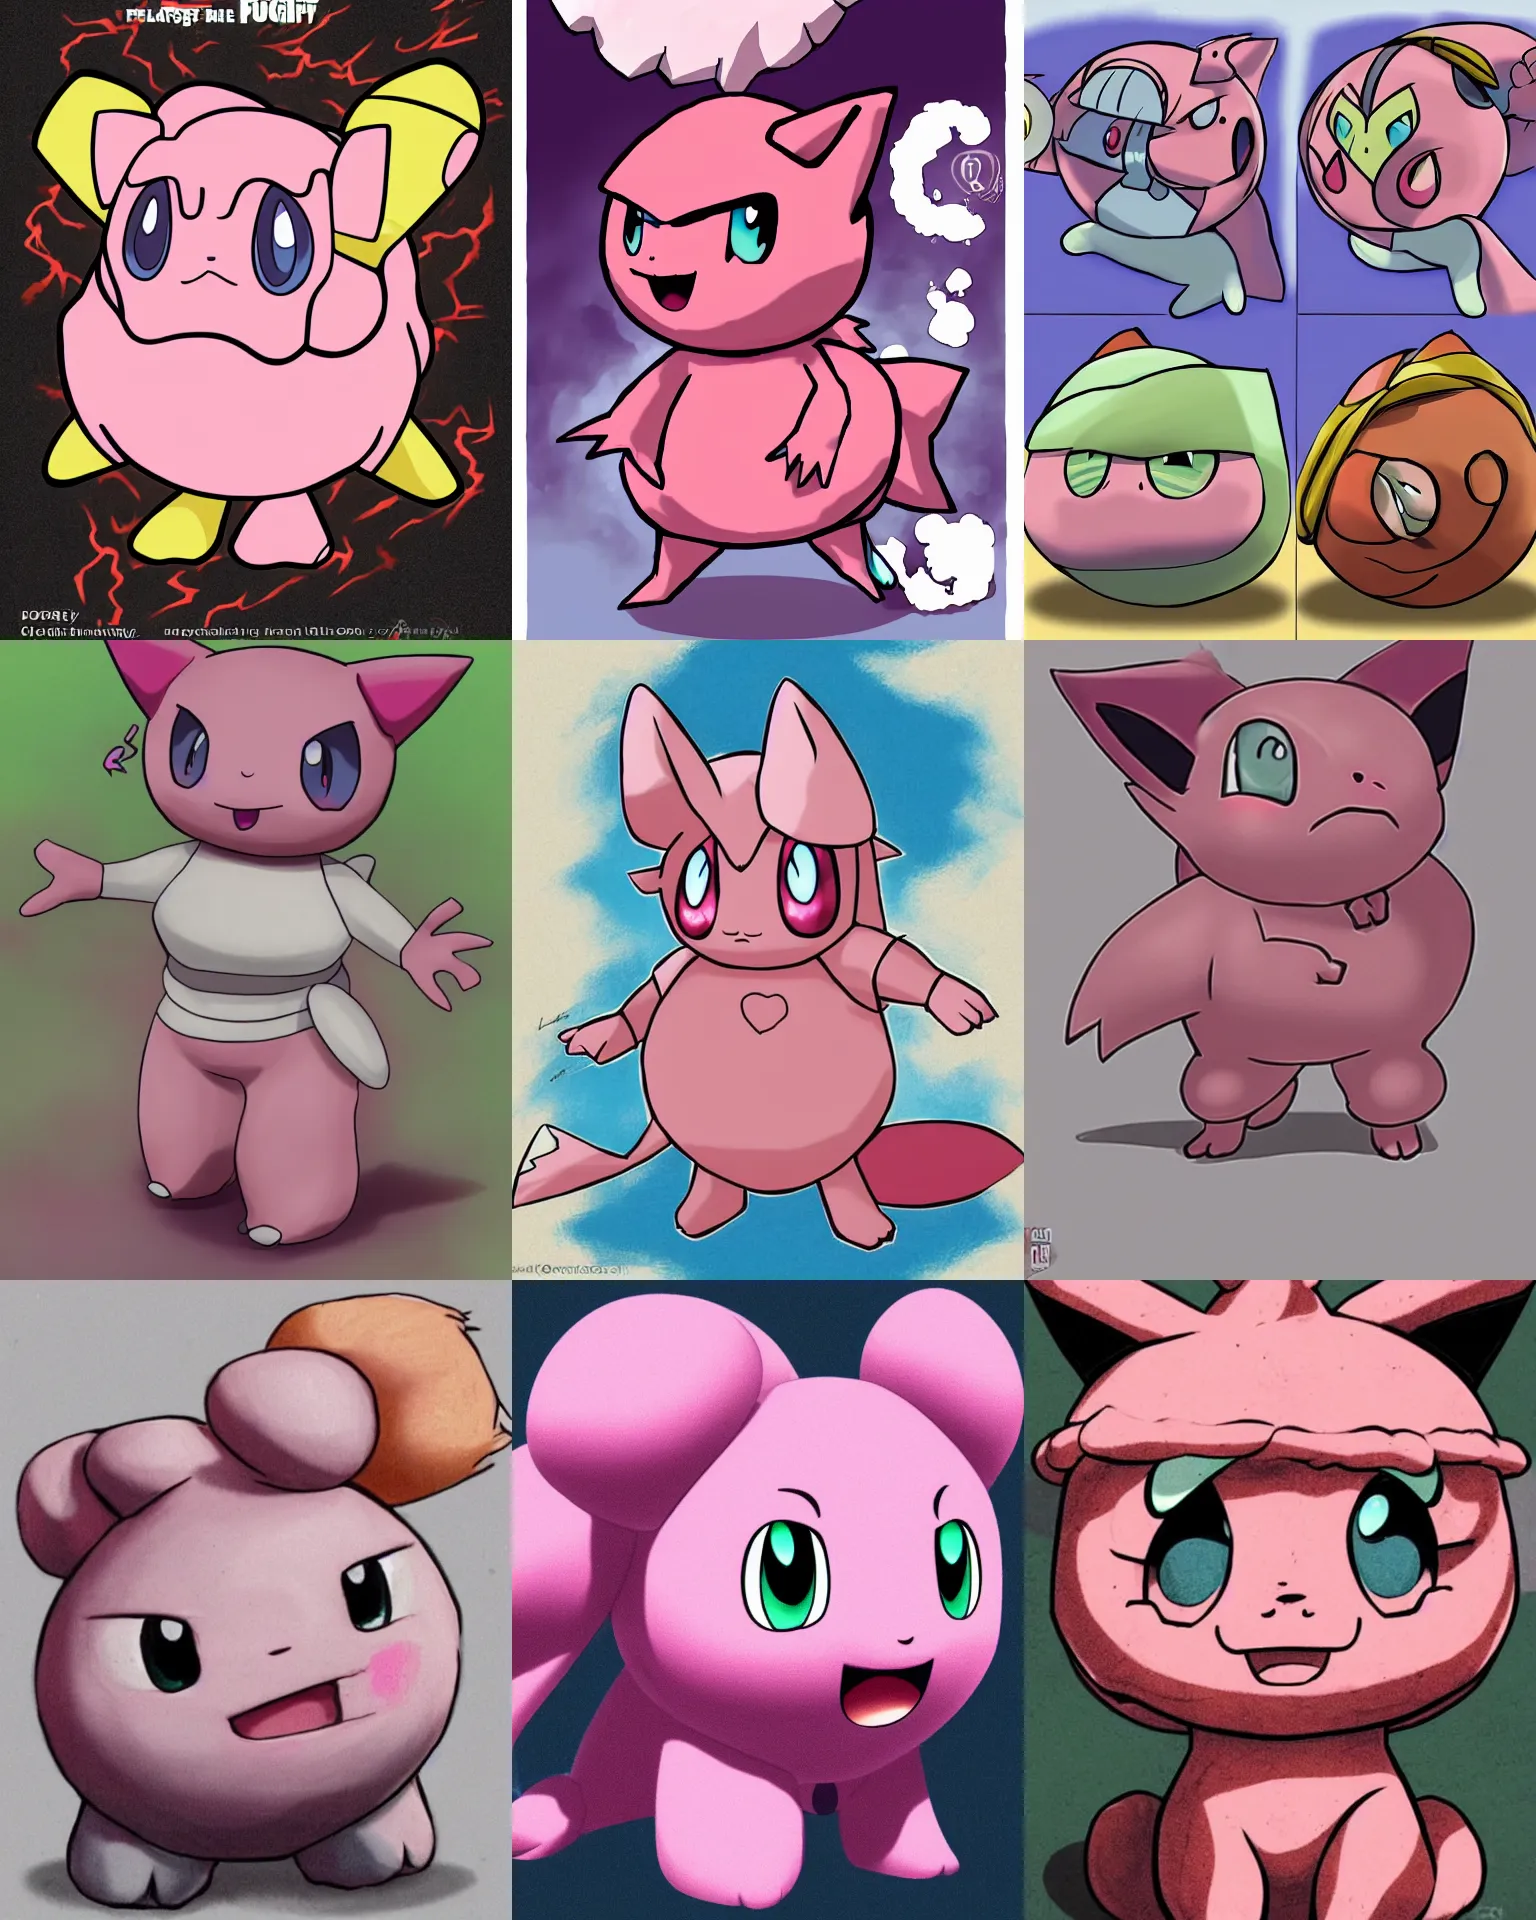 Prompt: JigglyPuff the Pokemon mixed with Chutulu portrait in the style of Robert Kirkman, and Greasley, Laurie